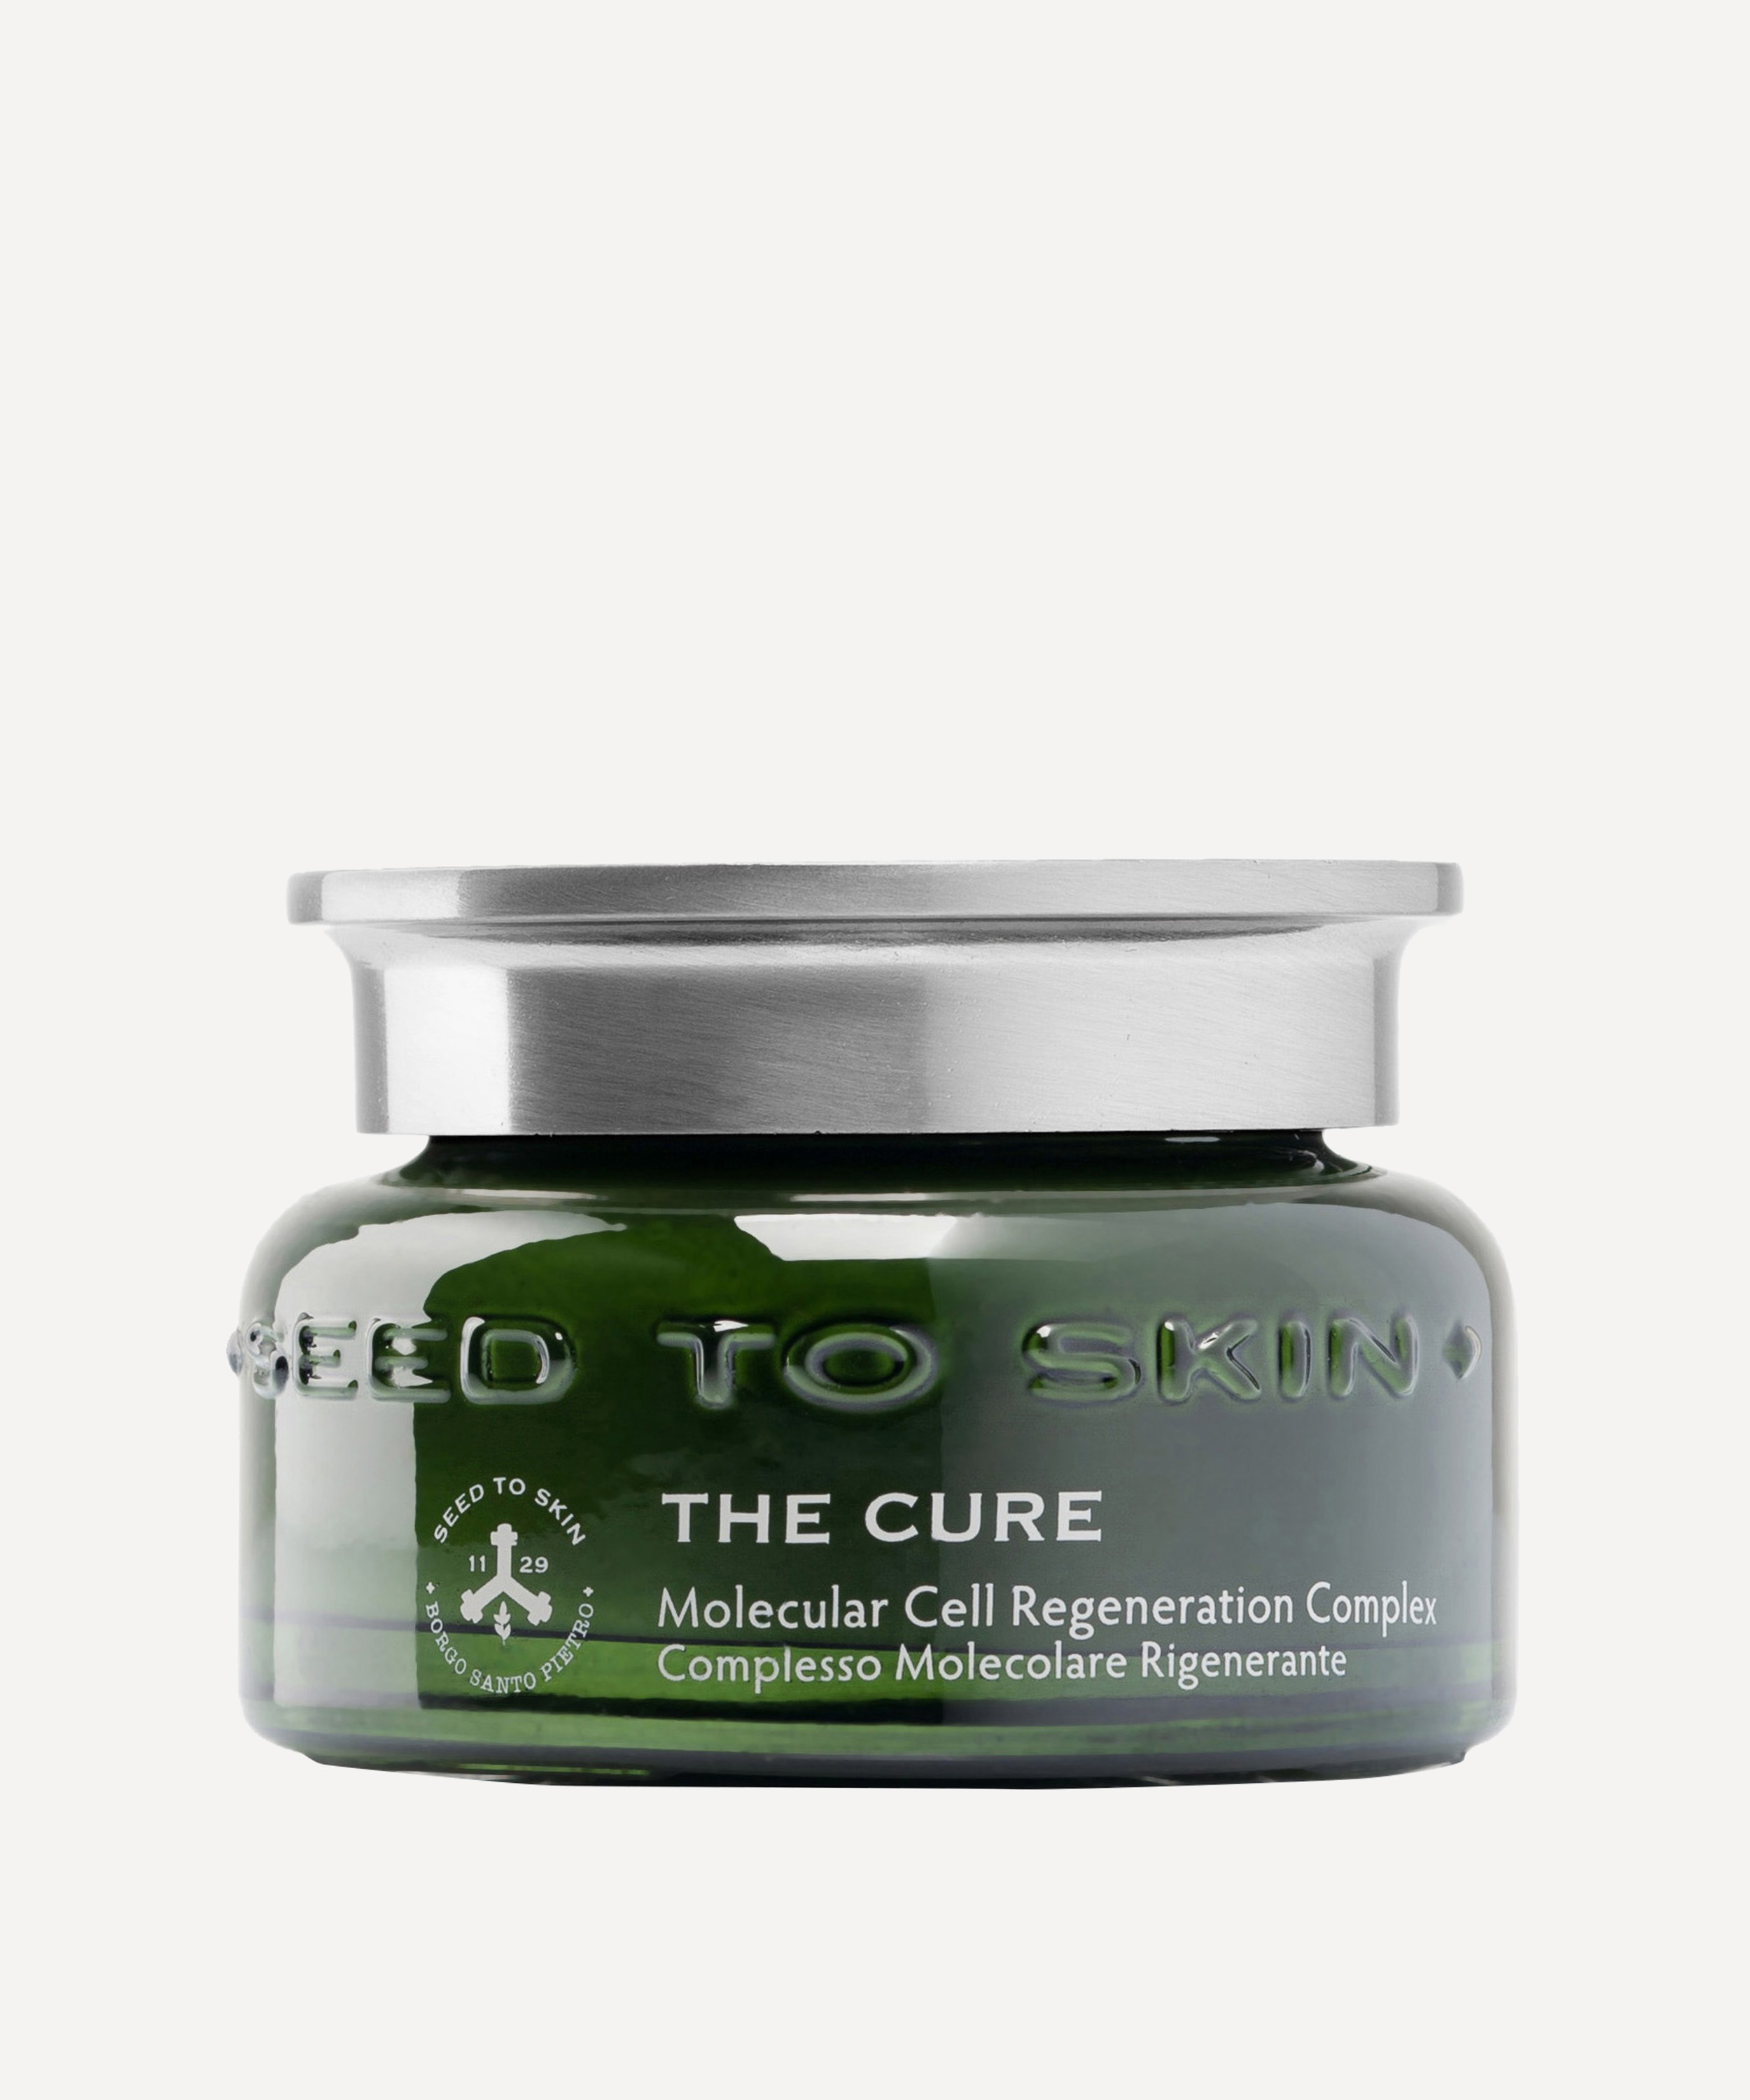 SEED TO SKIN - The Cure Molecular Cell Regeneration Complex 50ml